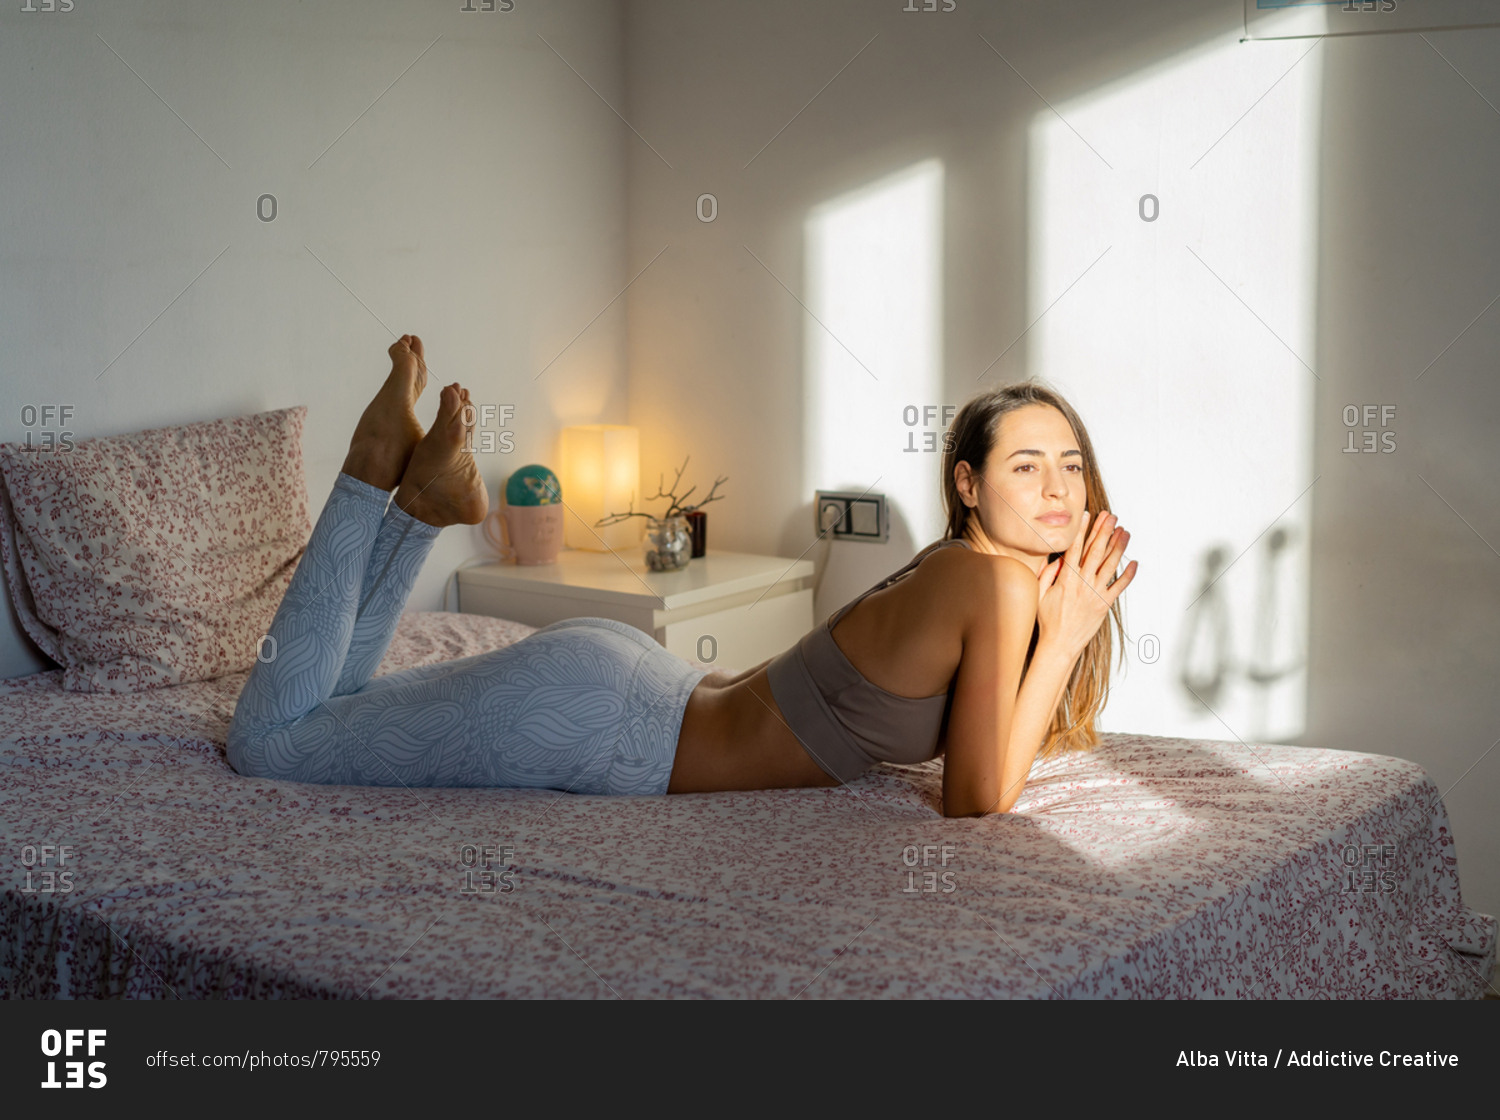 Woman in bra lying on bed stock photo - OFFSET